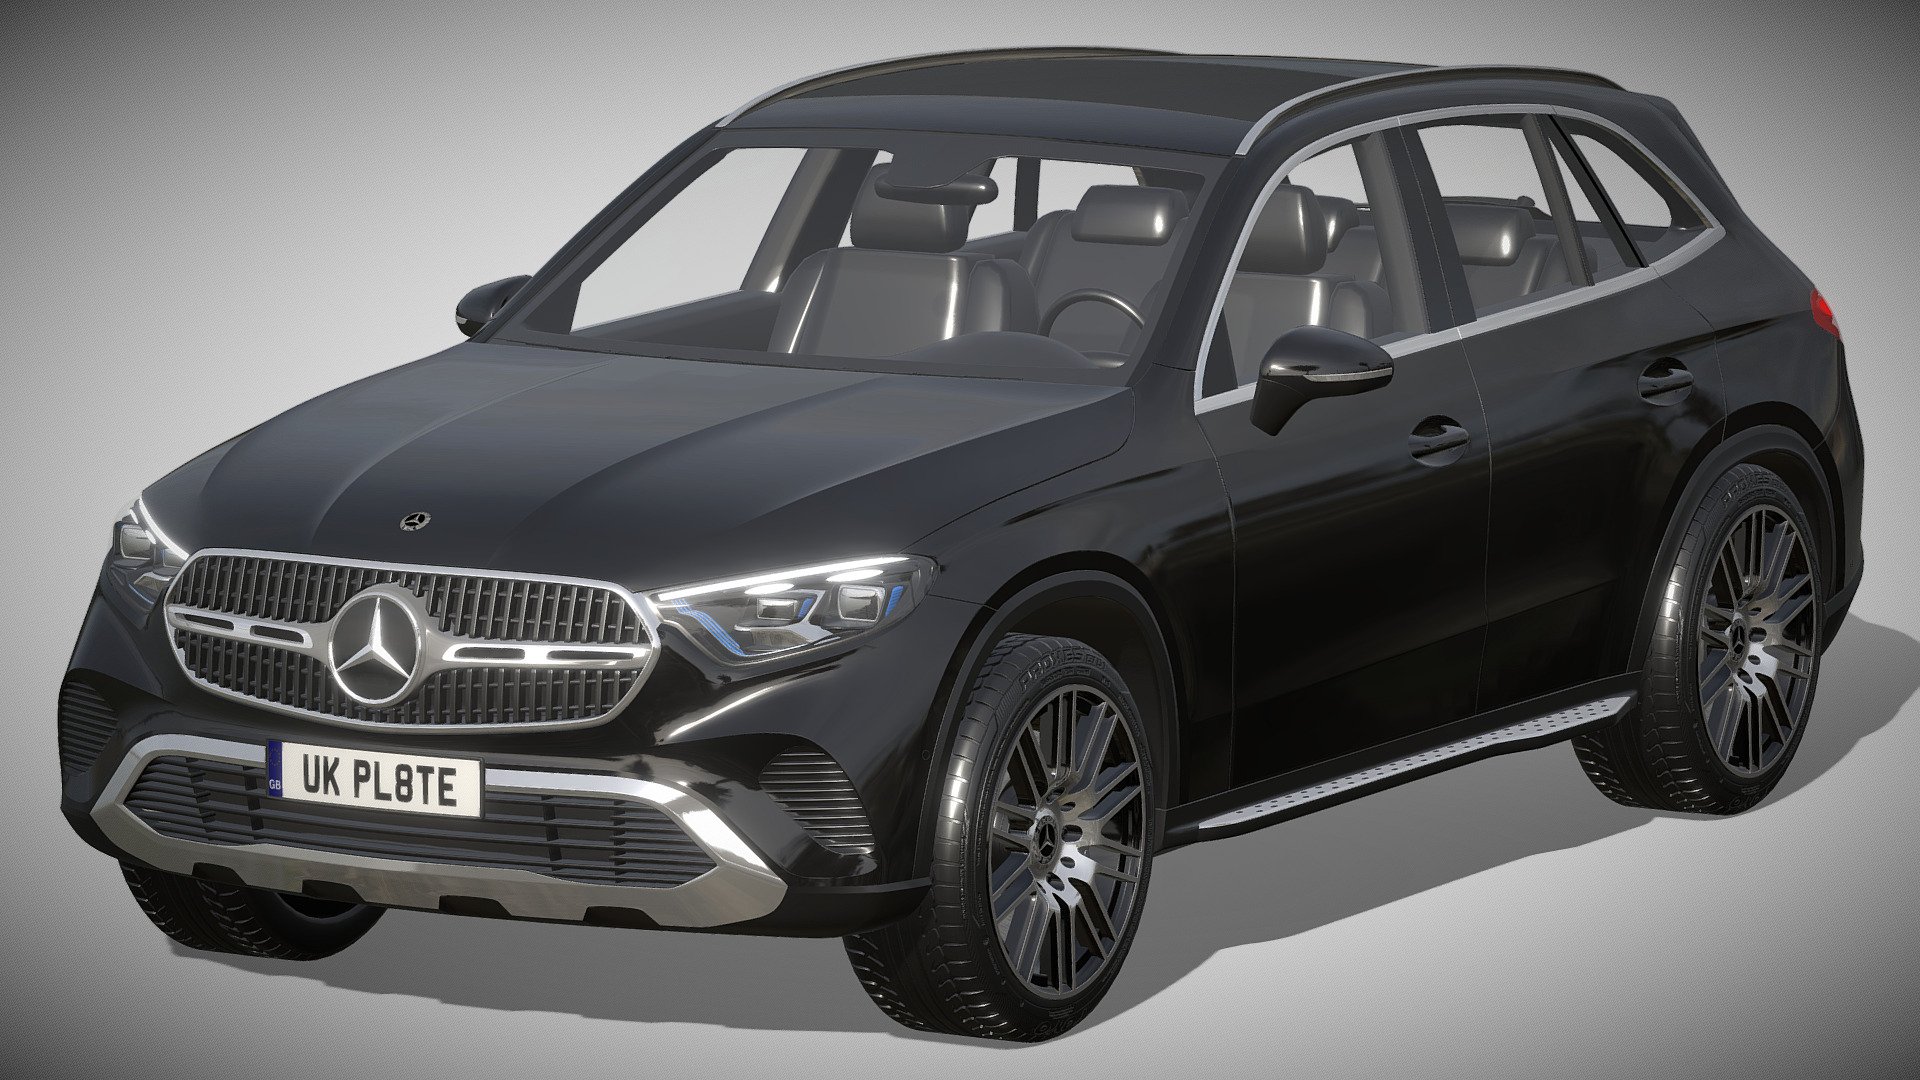 Mercedes-Benz GLC 2023

https://www.mercedes-benz.de/passengercars/models/suv/glc/overview.html

Clean geometry Light weight model, yet completely detailed for HI-Res renders. Use for movies, Advertisements or games

Corona render and materials

All textures include in *.rar files

Lighting setup is not included in the file! - Mercedes-Benz GLC 2023 - Buy Royalty Free 3D model by zifir3d 3d model